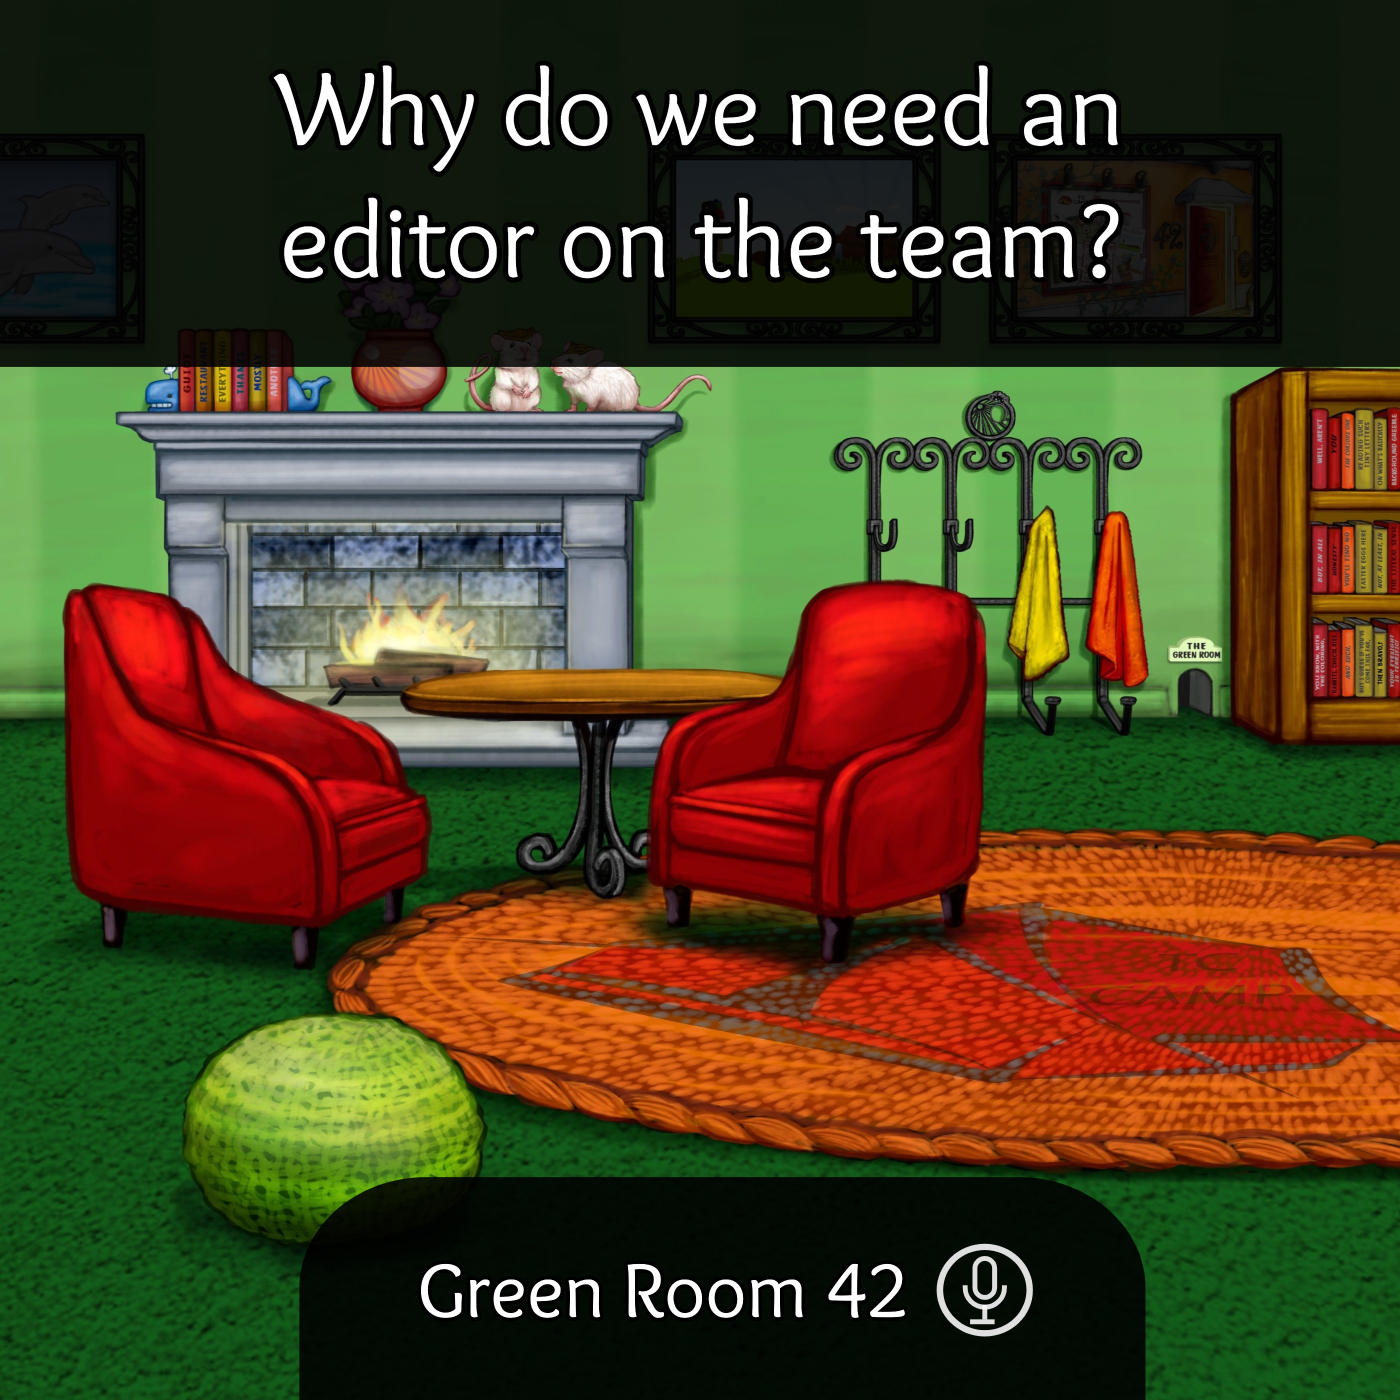 The Importance of Editors (Green Room 42)